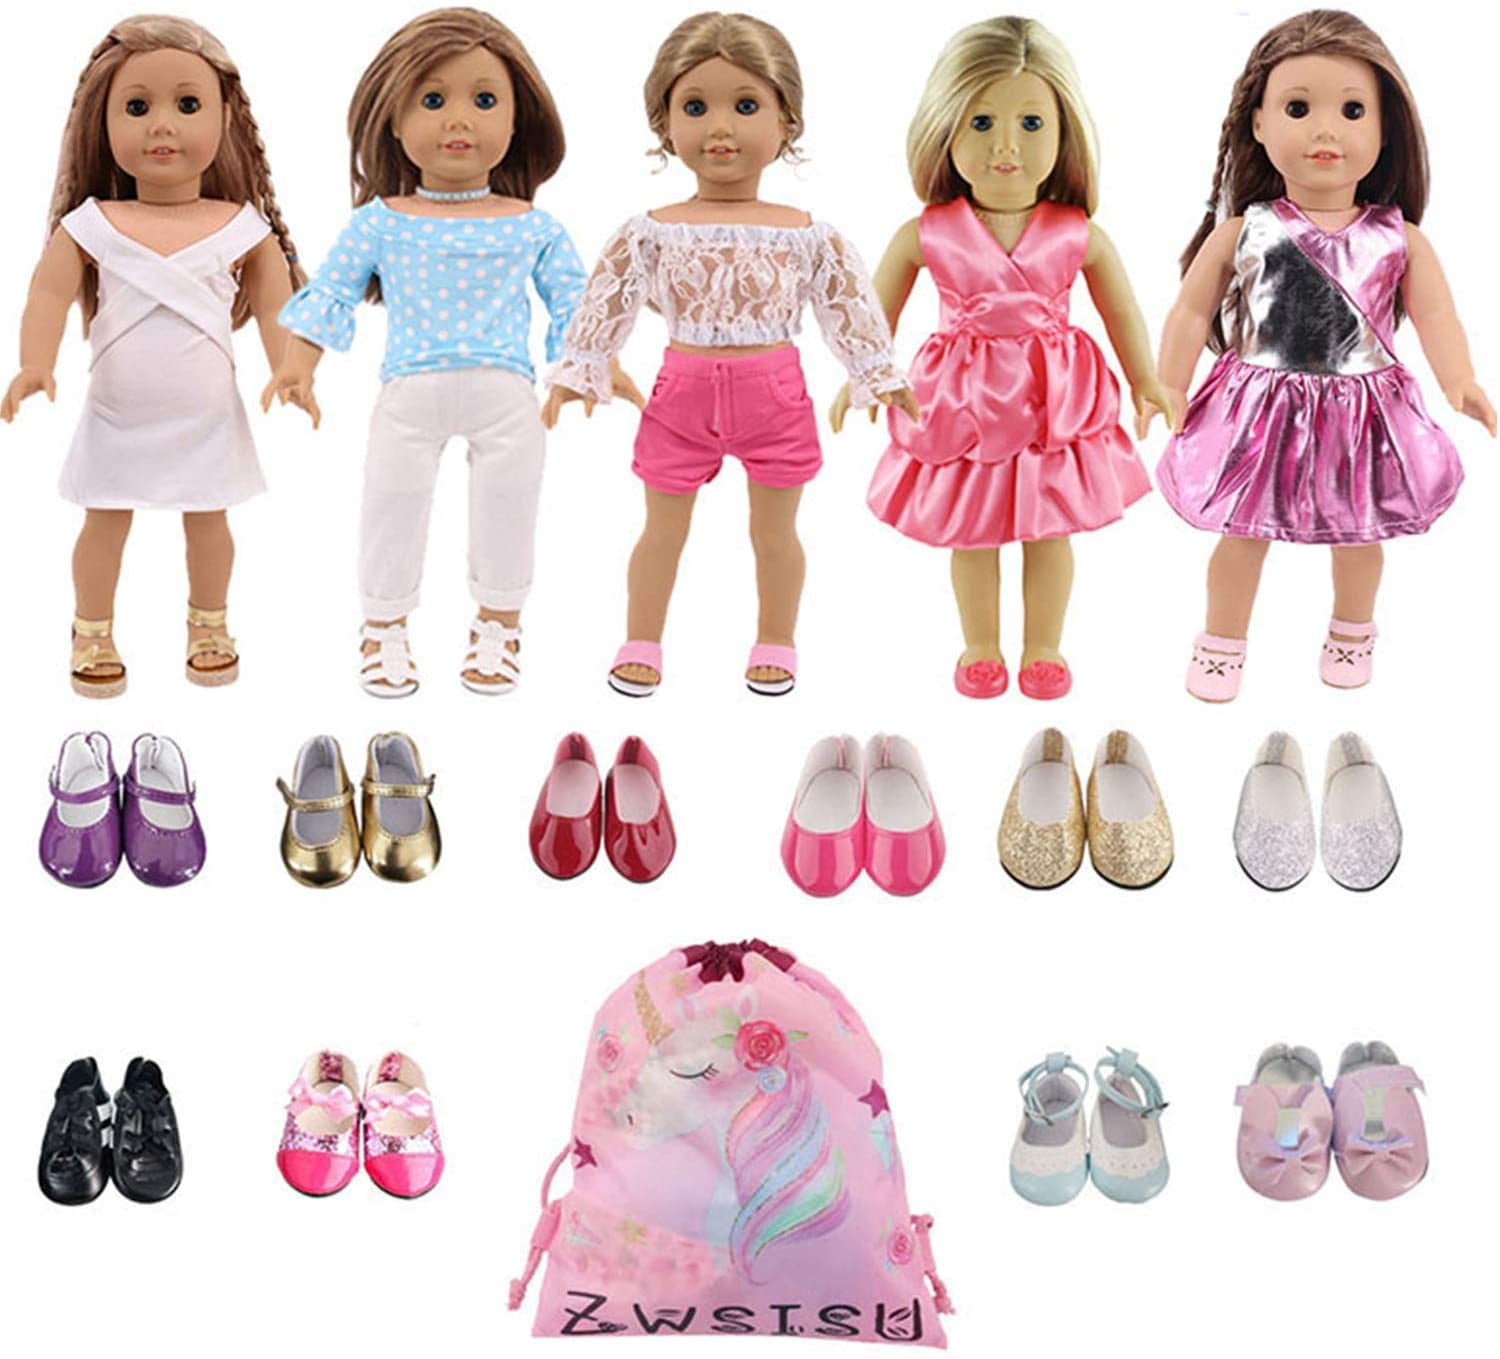 random 5pcs cake shoes toothbrush Biscuit for 18'' American Girl doll accessory 